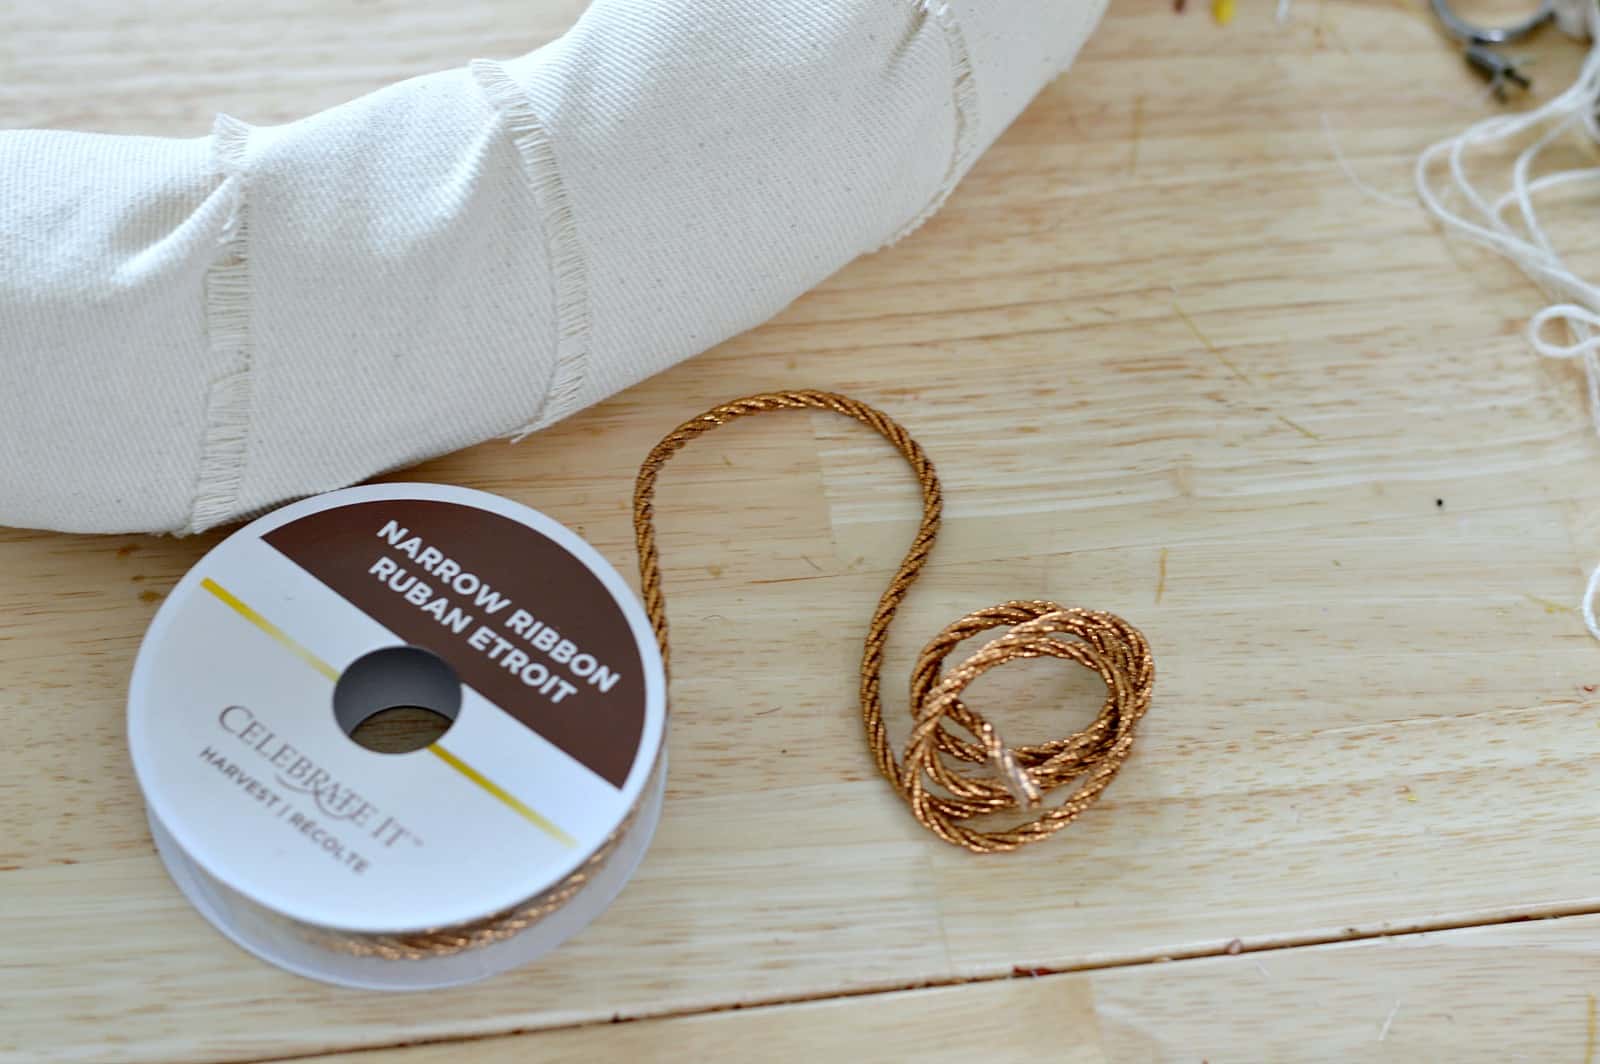 The edge of a wreath, wrapped in burlap and a roll of copper-colored twine